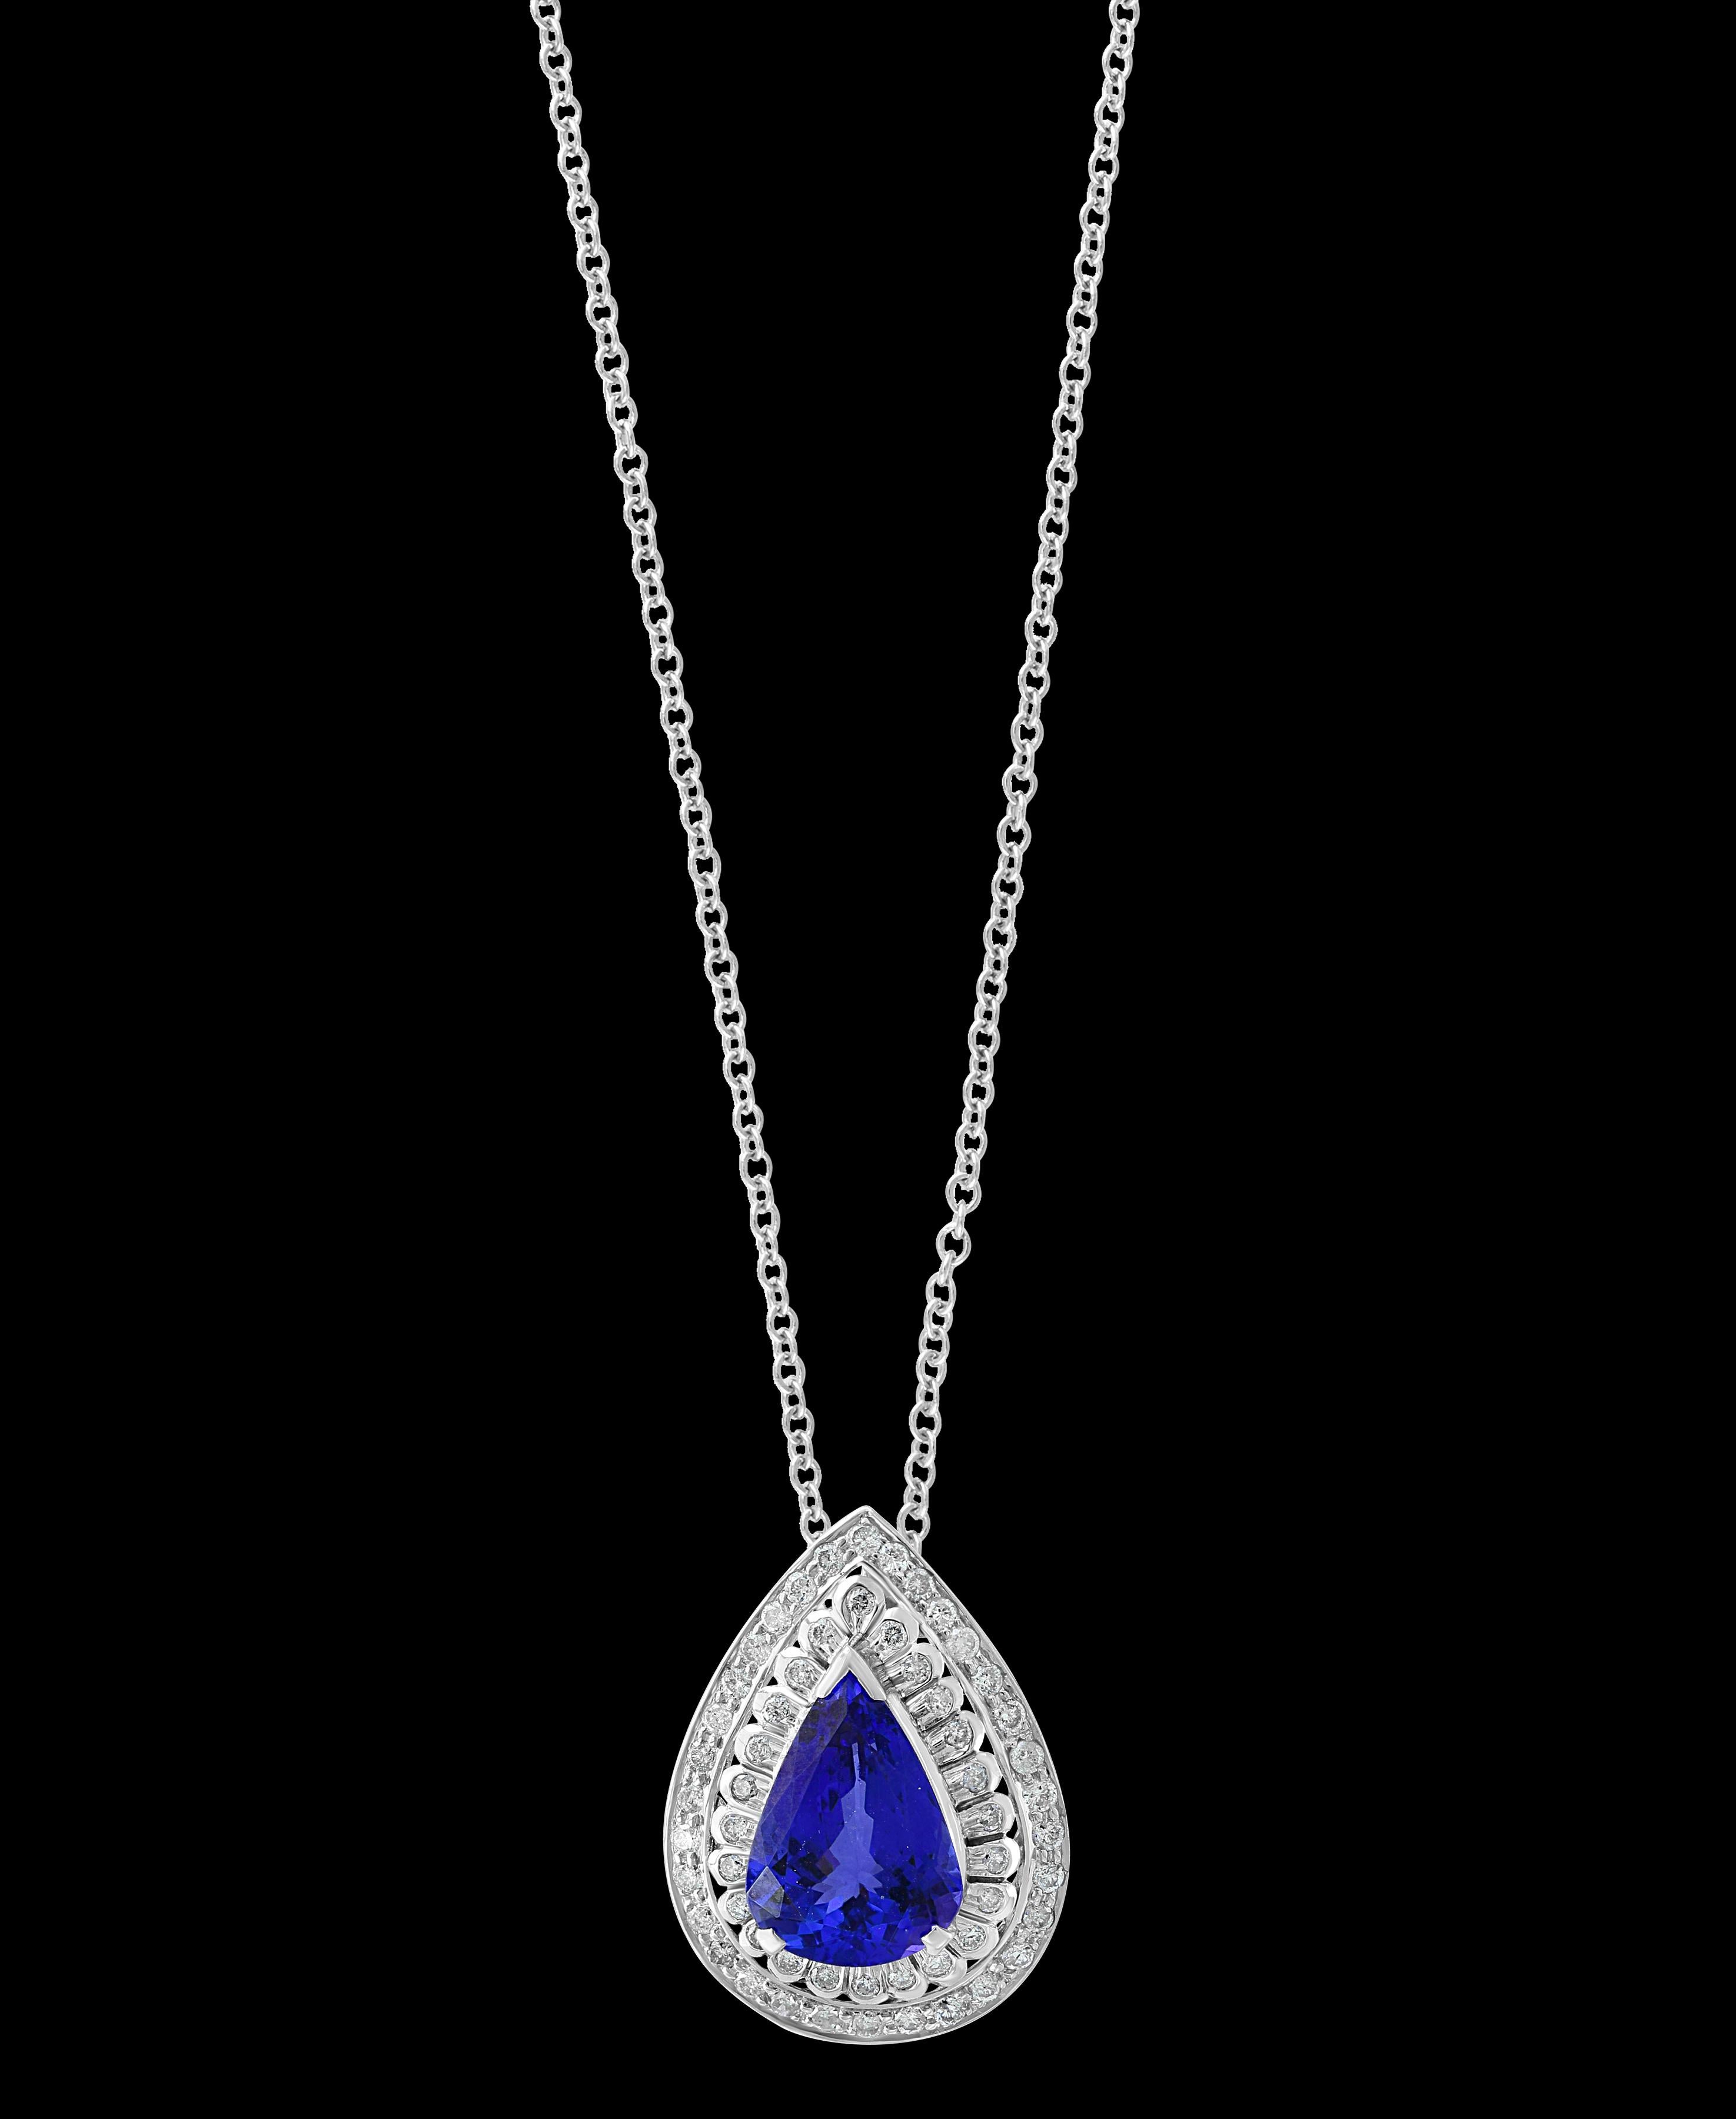 7 Carat AAA Tanzanite and Diamond Pendant/ Necklace 18 Karat White Gold In New Condition For Sale In New York, NY